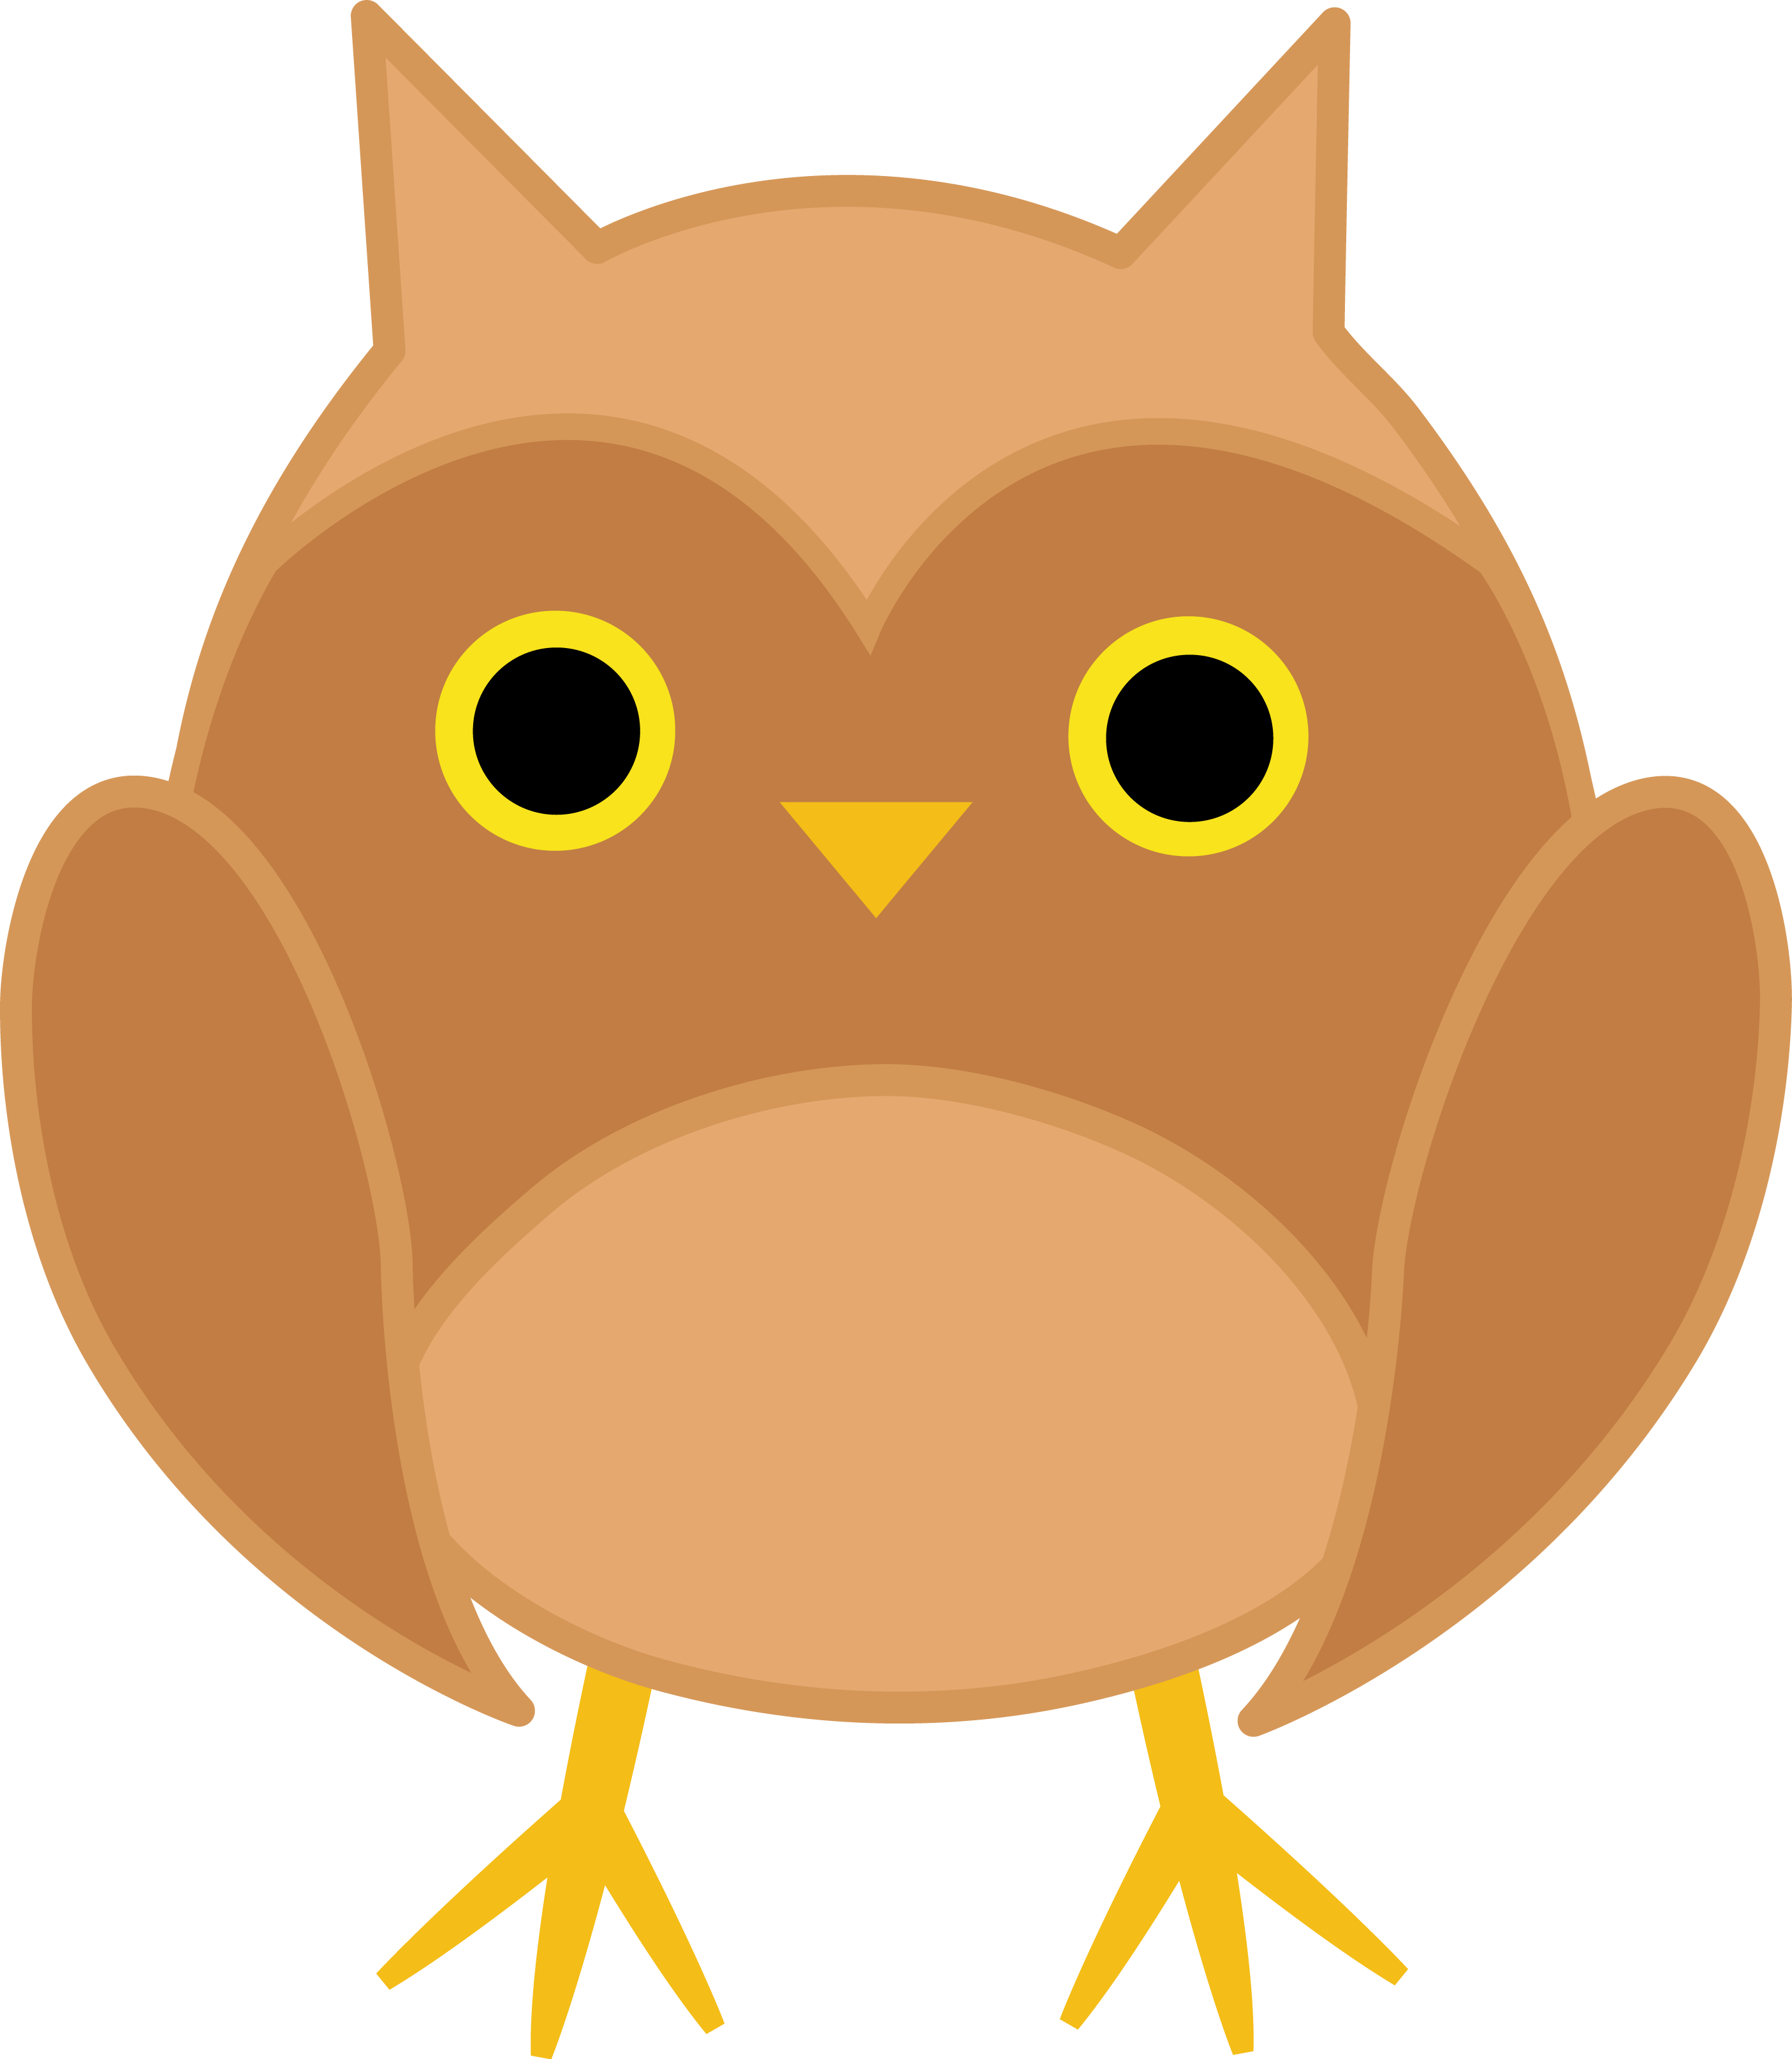 Free Owl Cartoon Png, Download Free Owl Cartoon Png png images, Free